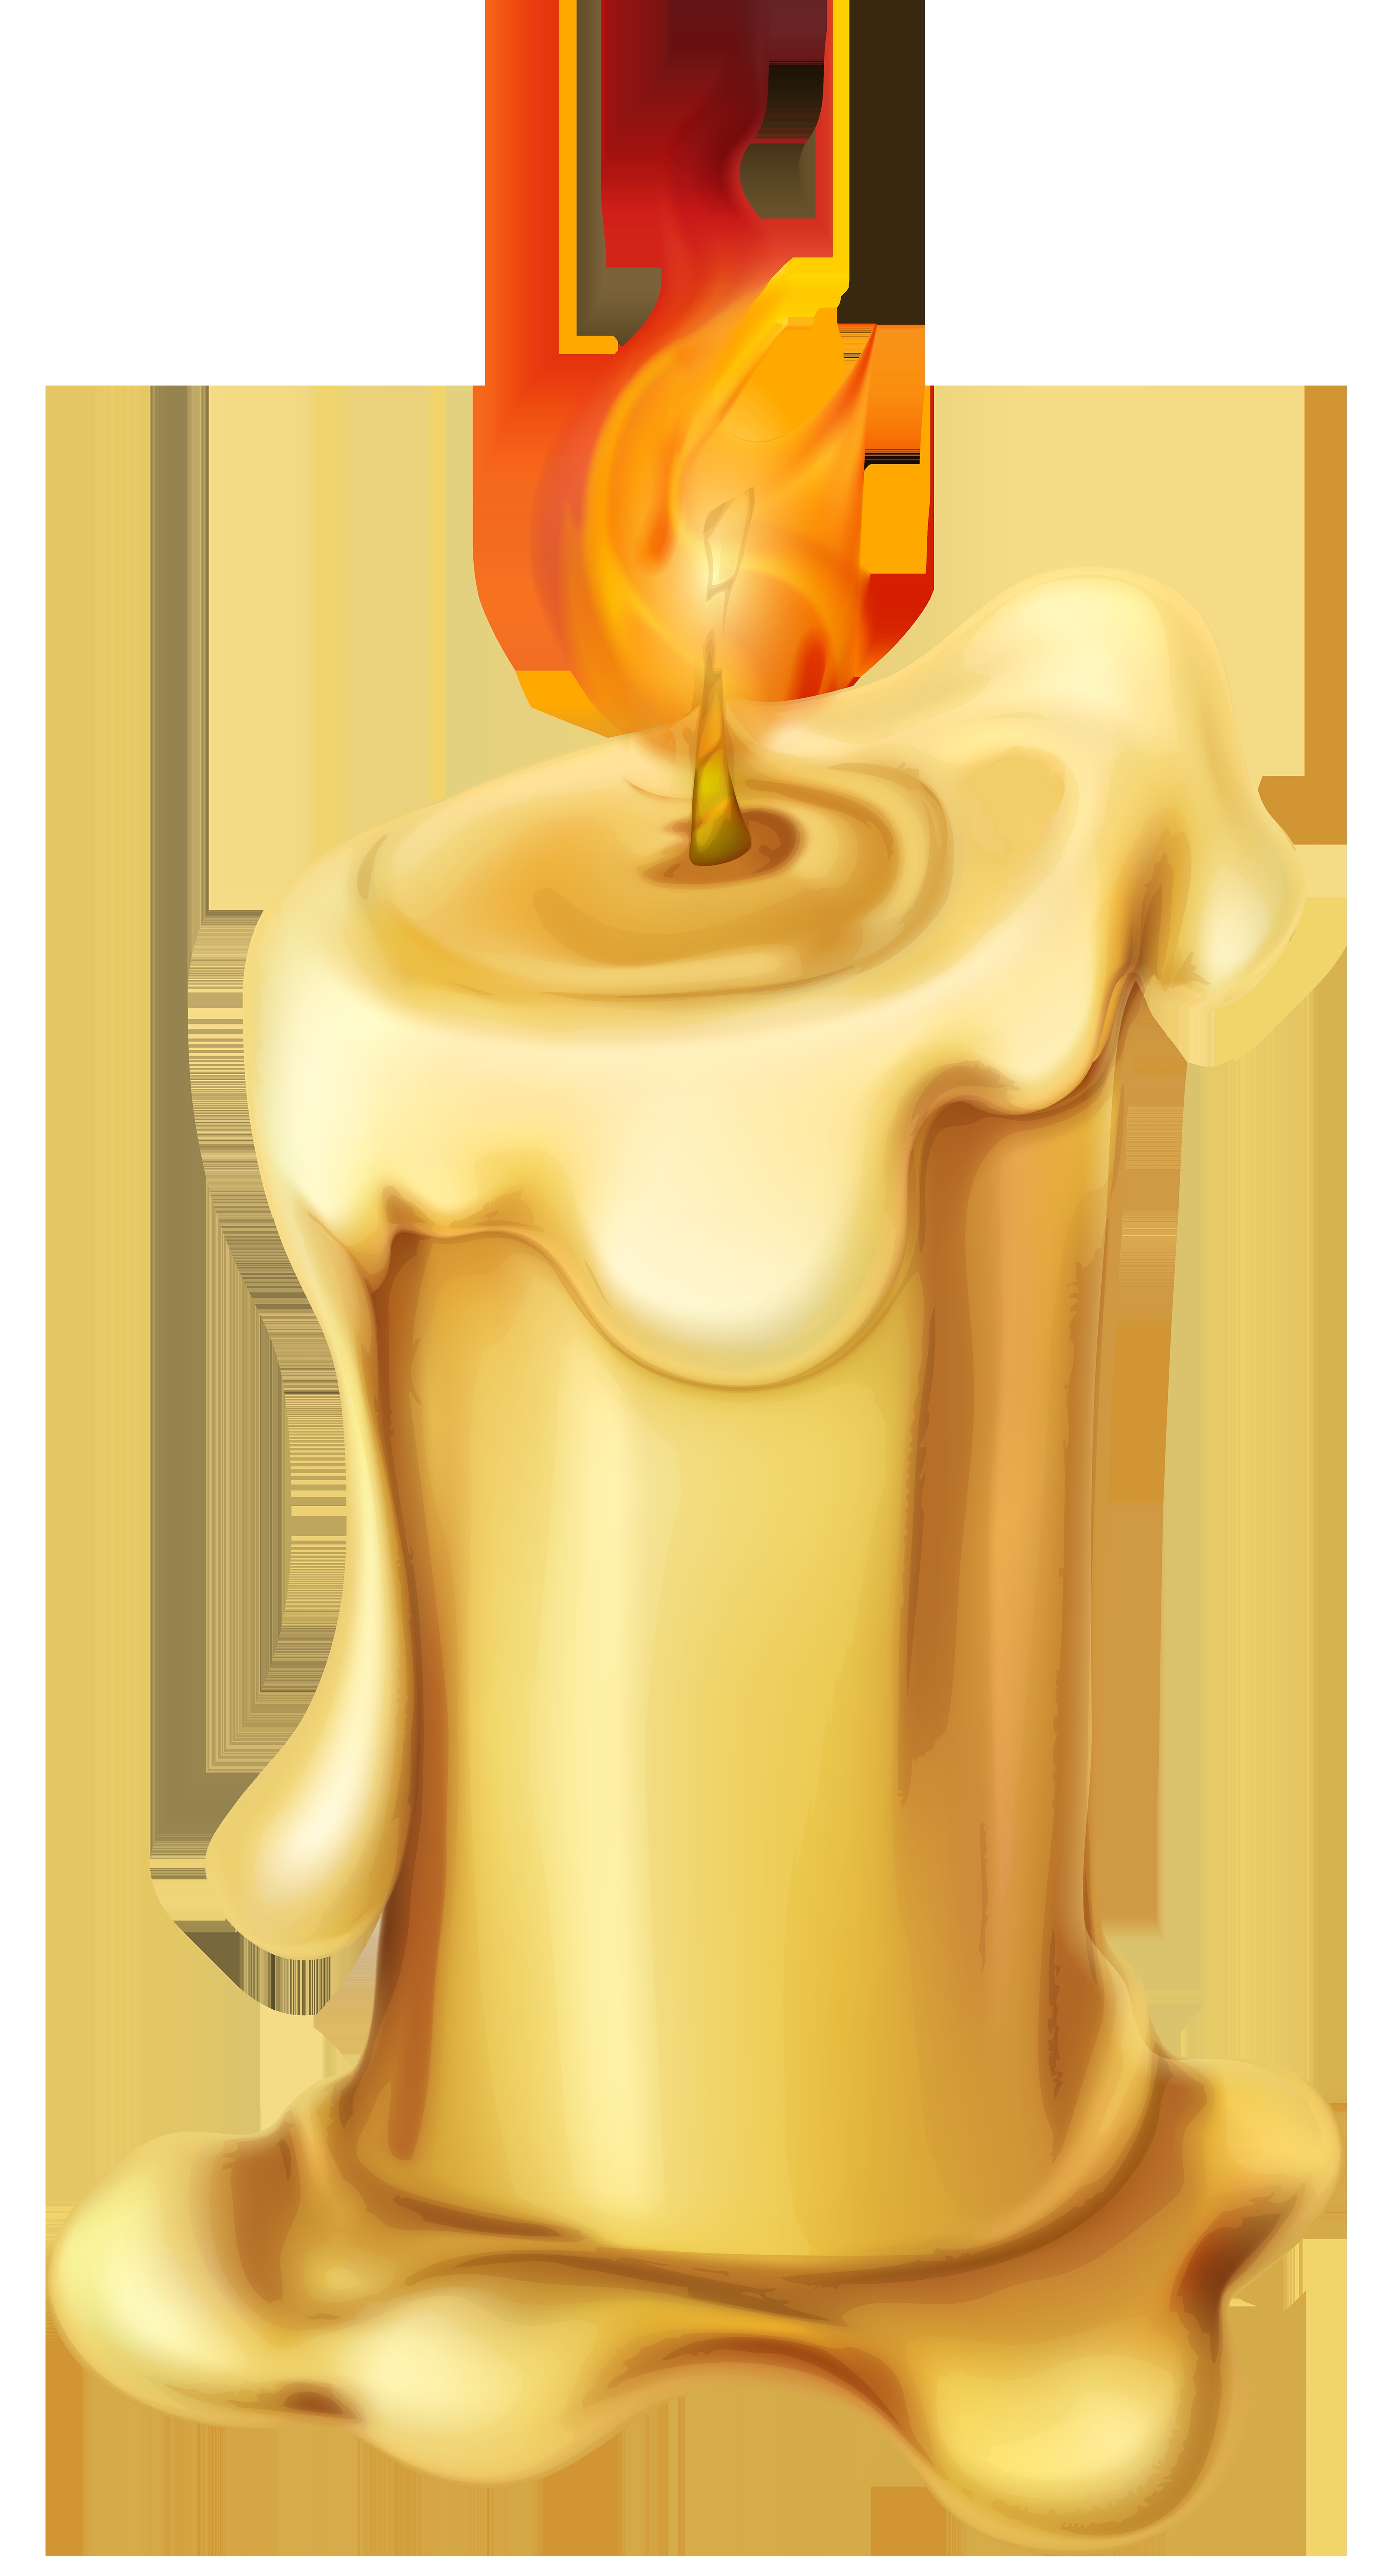 candle clipart 3 candle